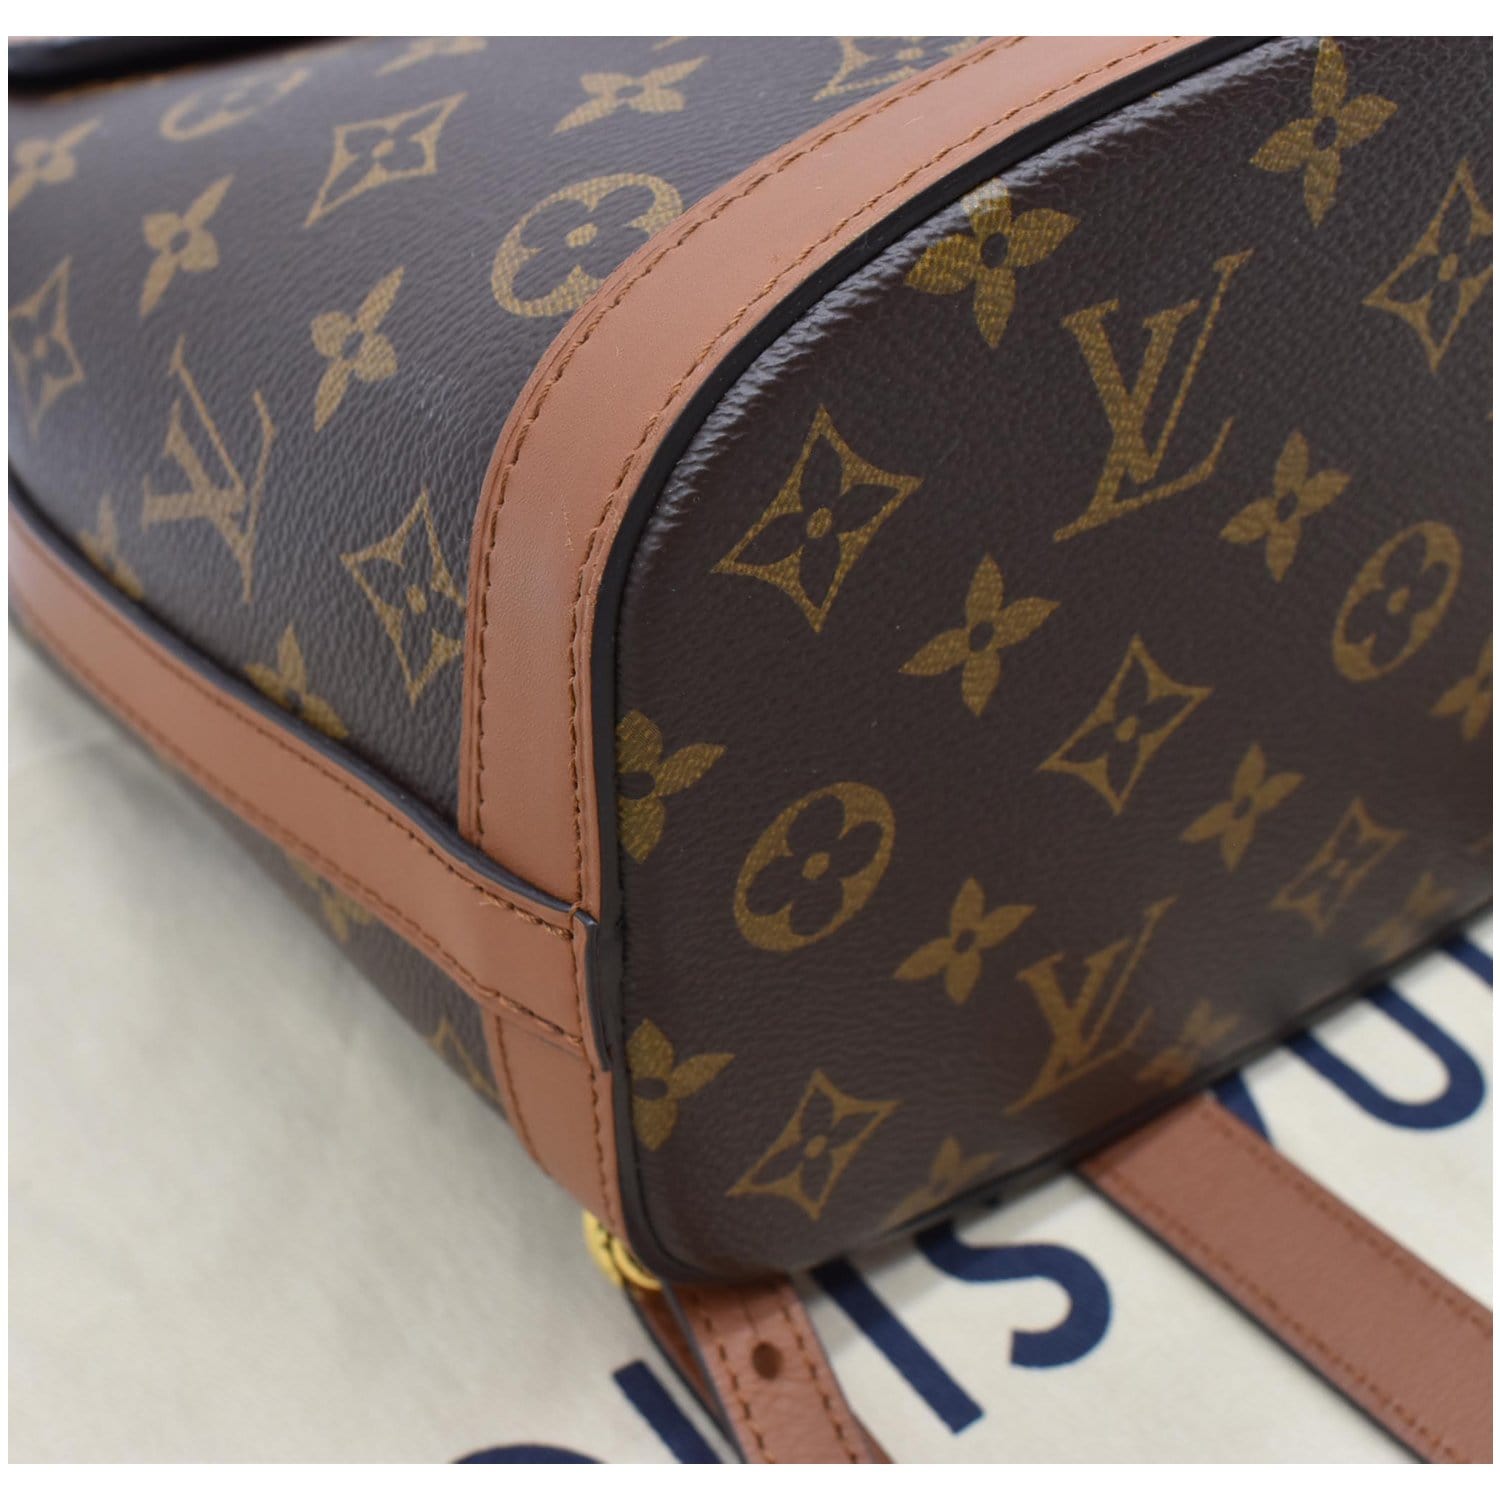 LOUIS VUITTON, DAUPHINE BACKPACK